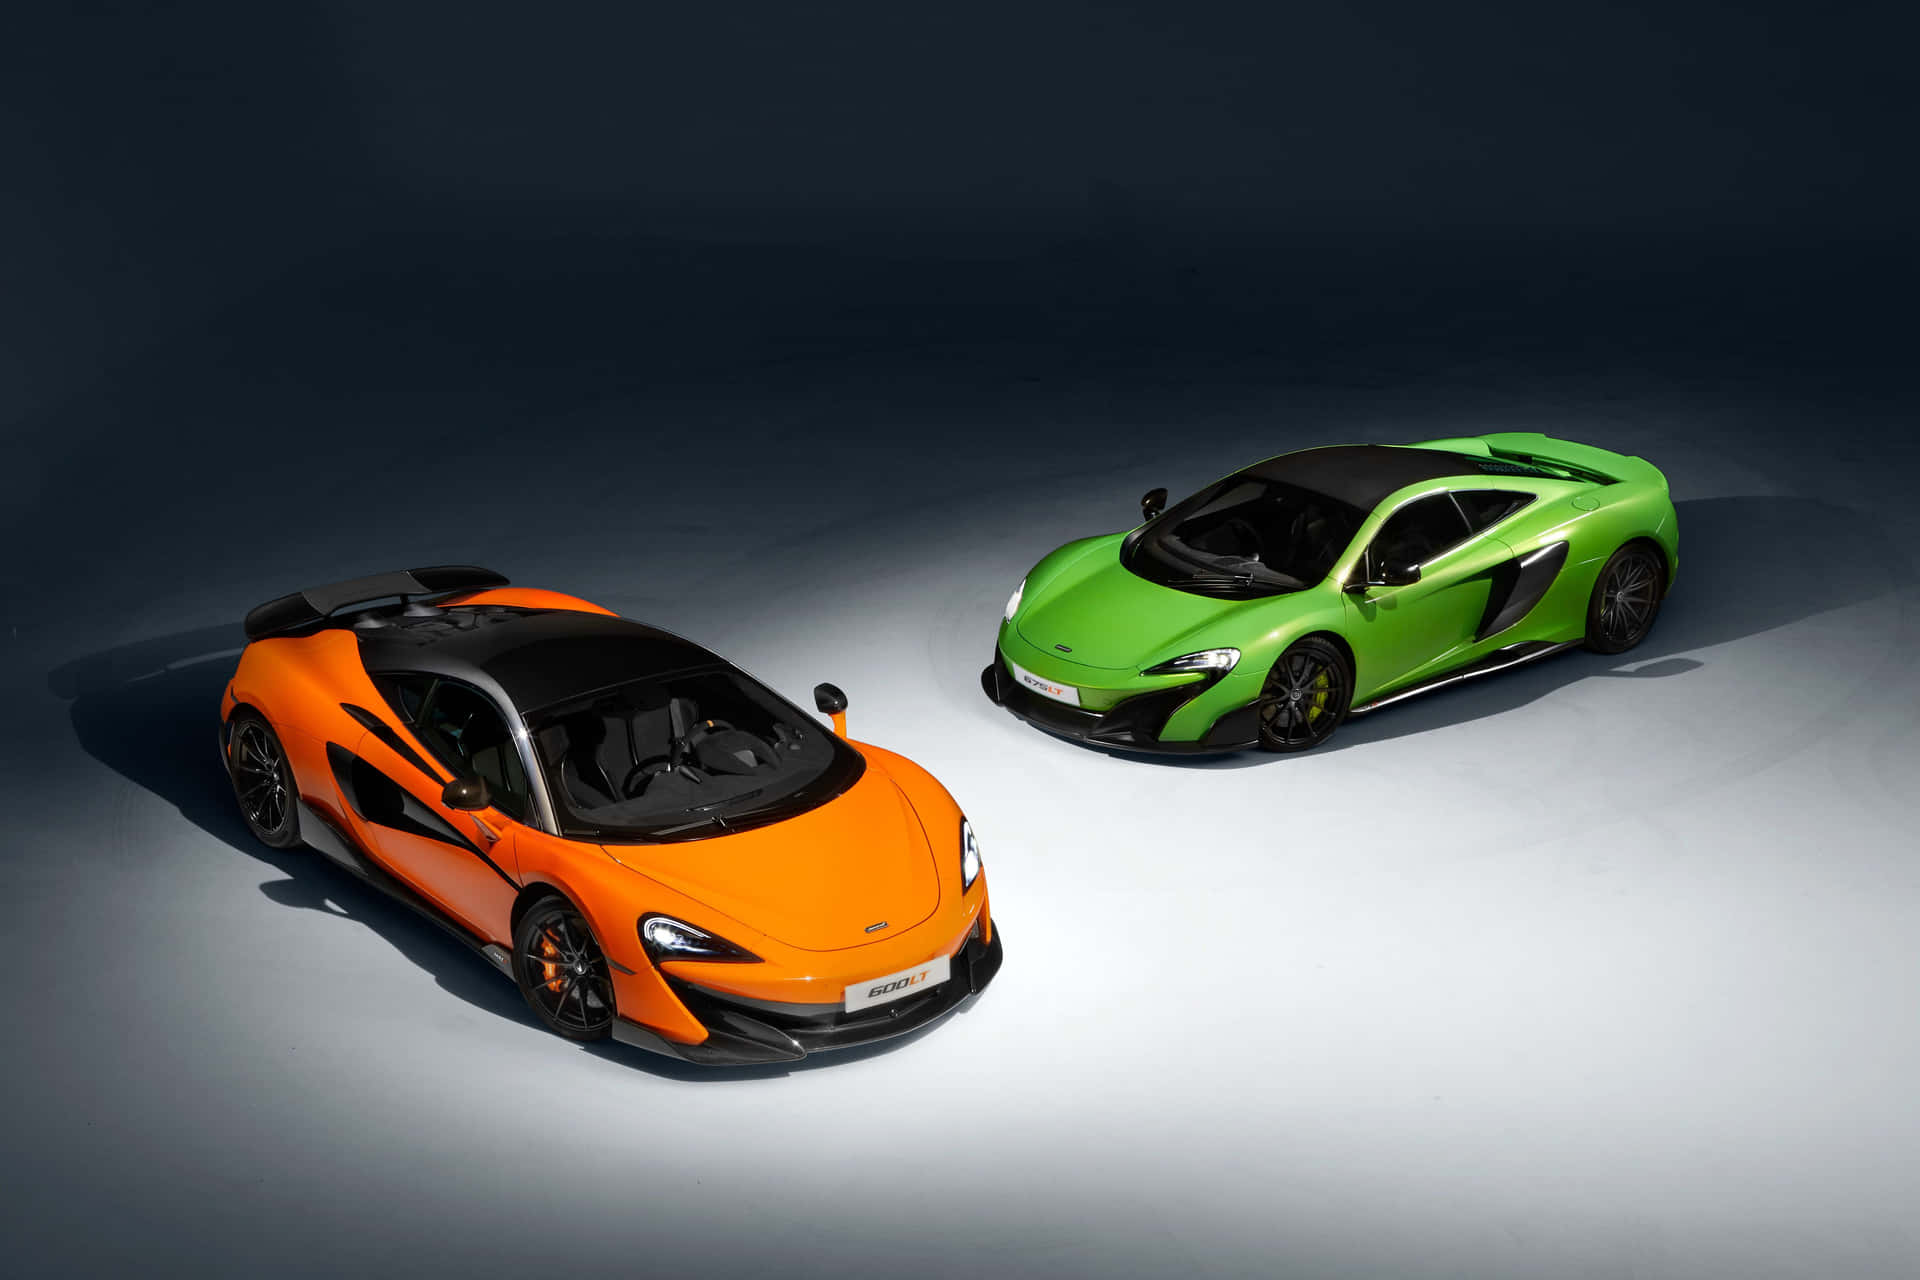 Caption: Experience Speed And Luxury With The Mclaren 675lt Wallpaper